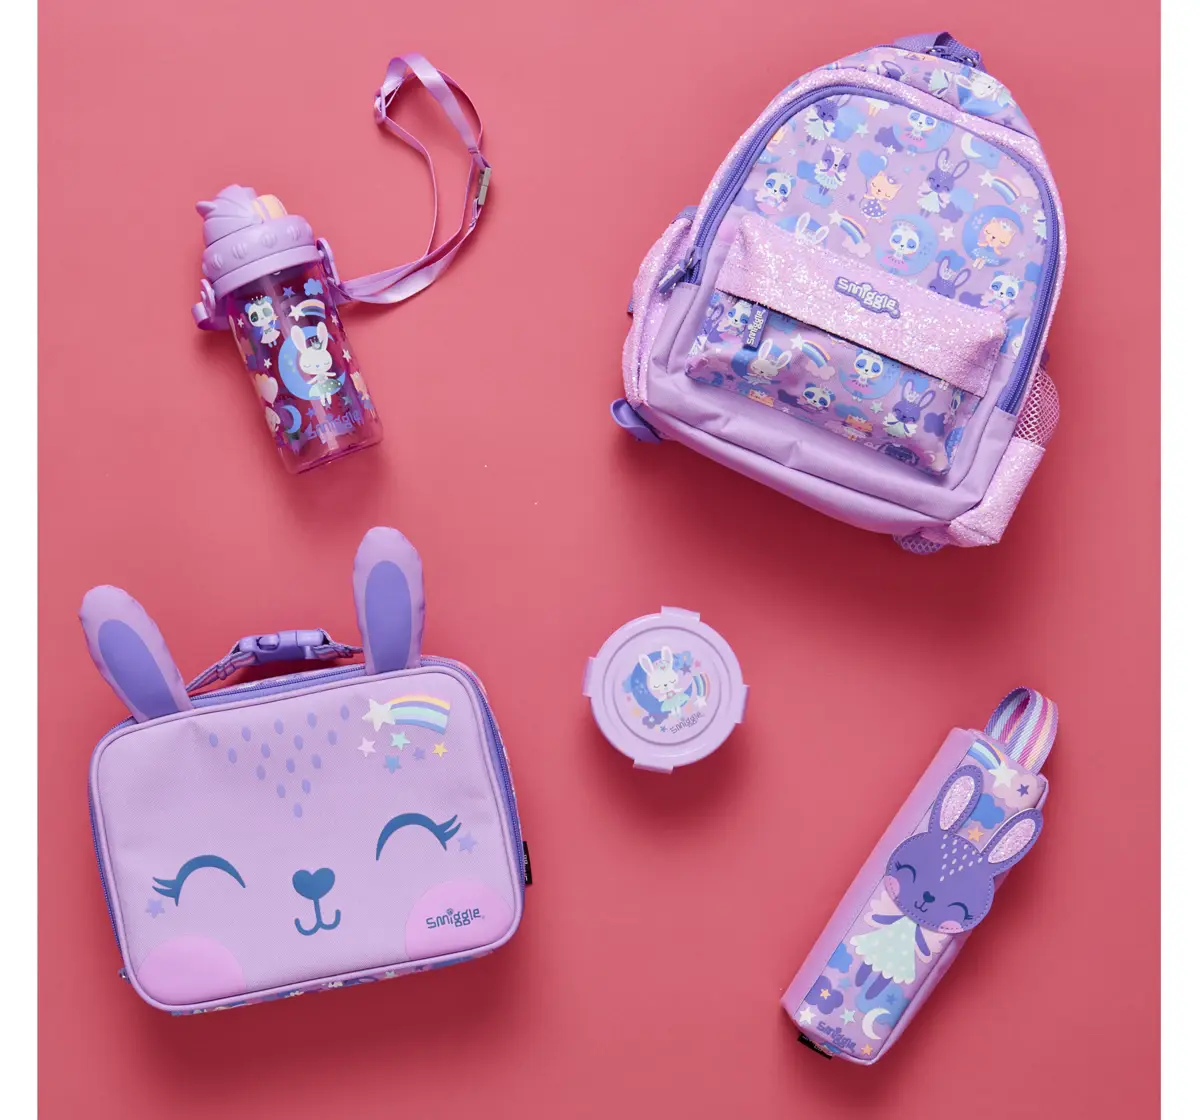 Smiggle Round About Lunch Box Bento, Medium, Lilac, 3Y+